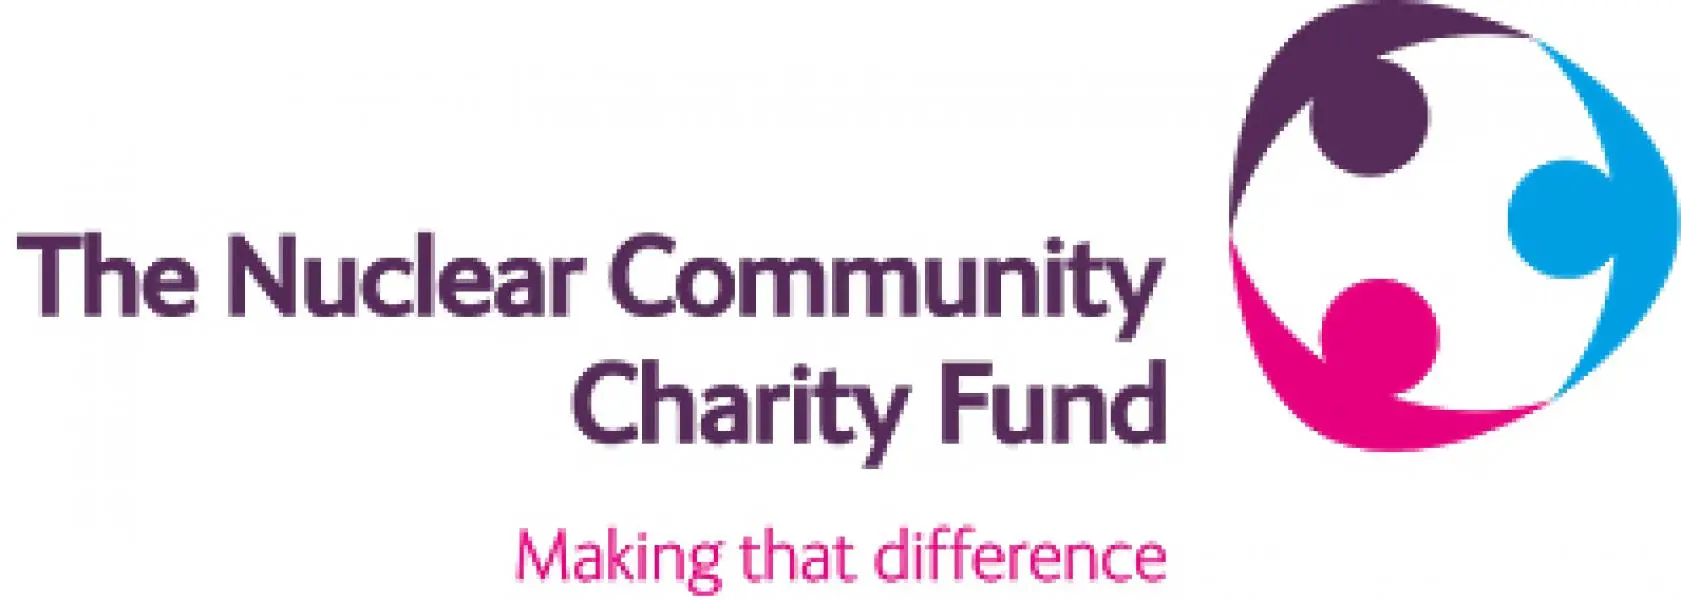 Nuclear Community Charity Fund